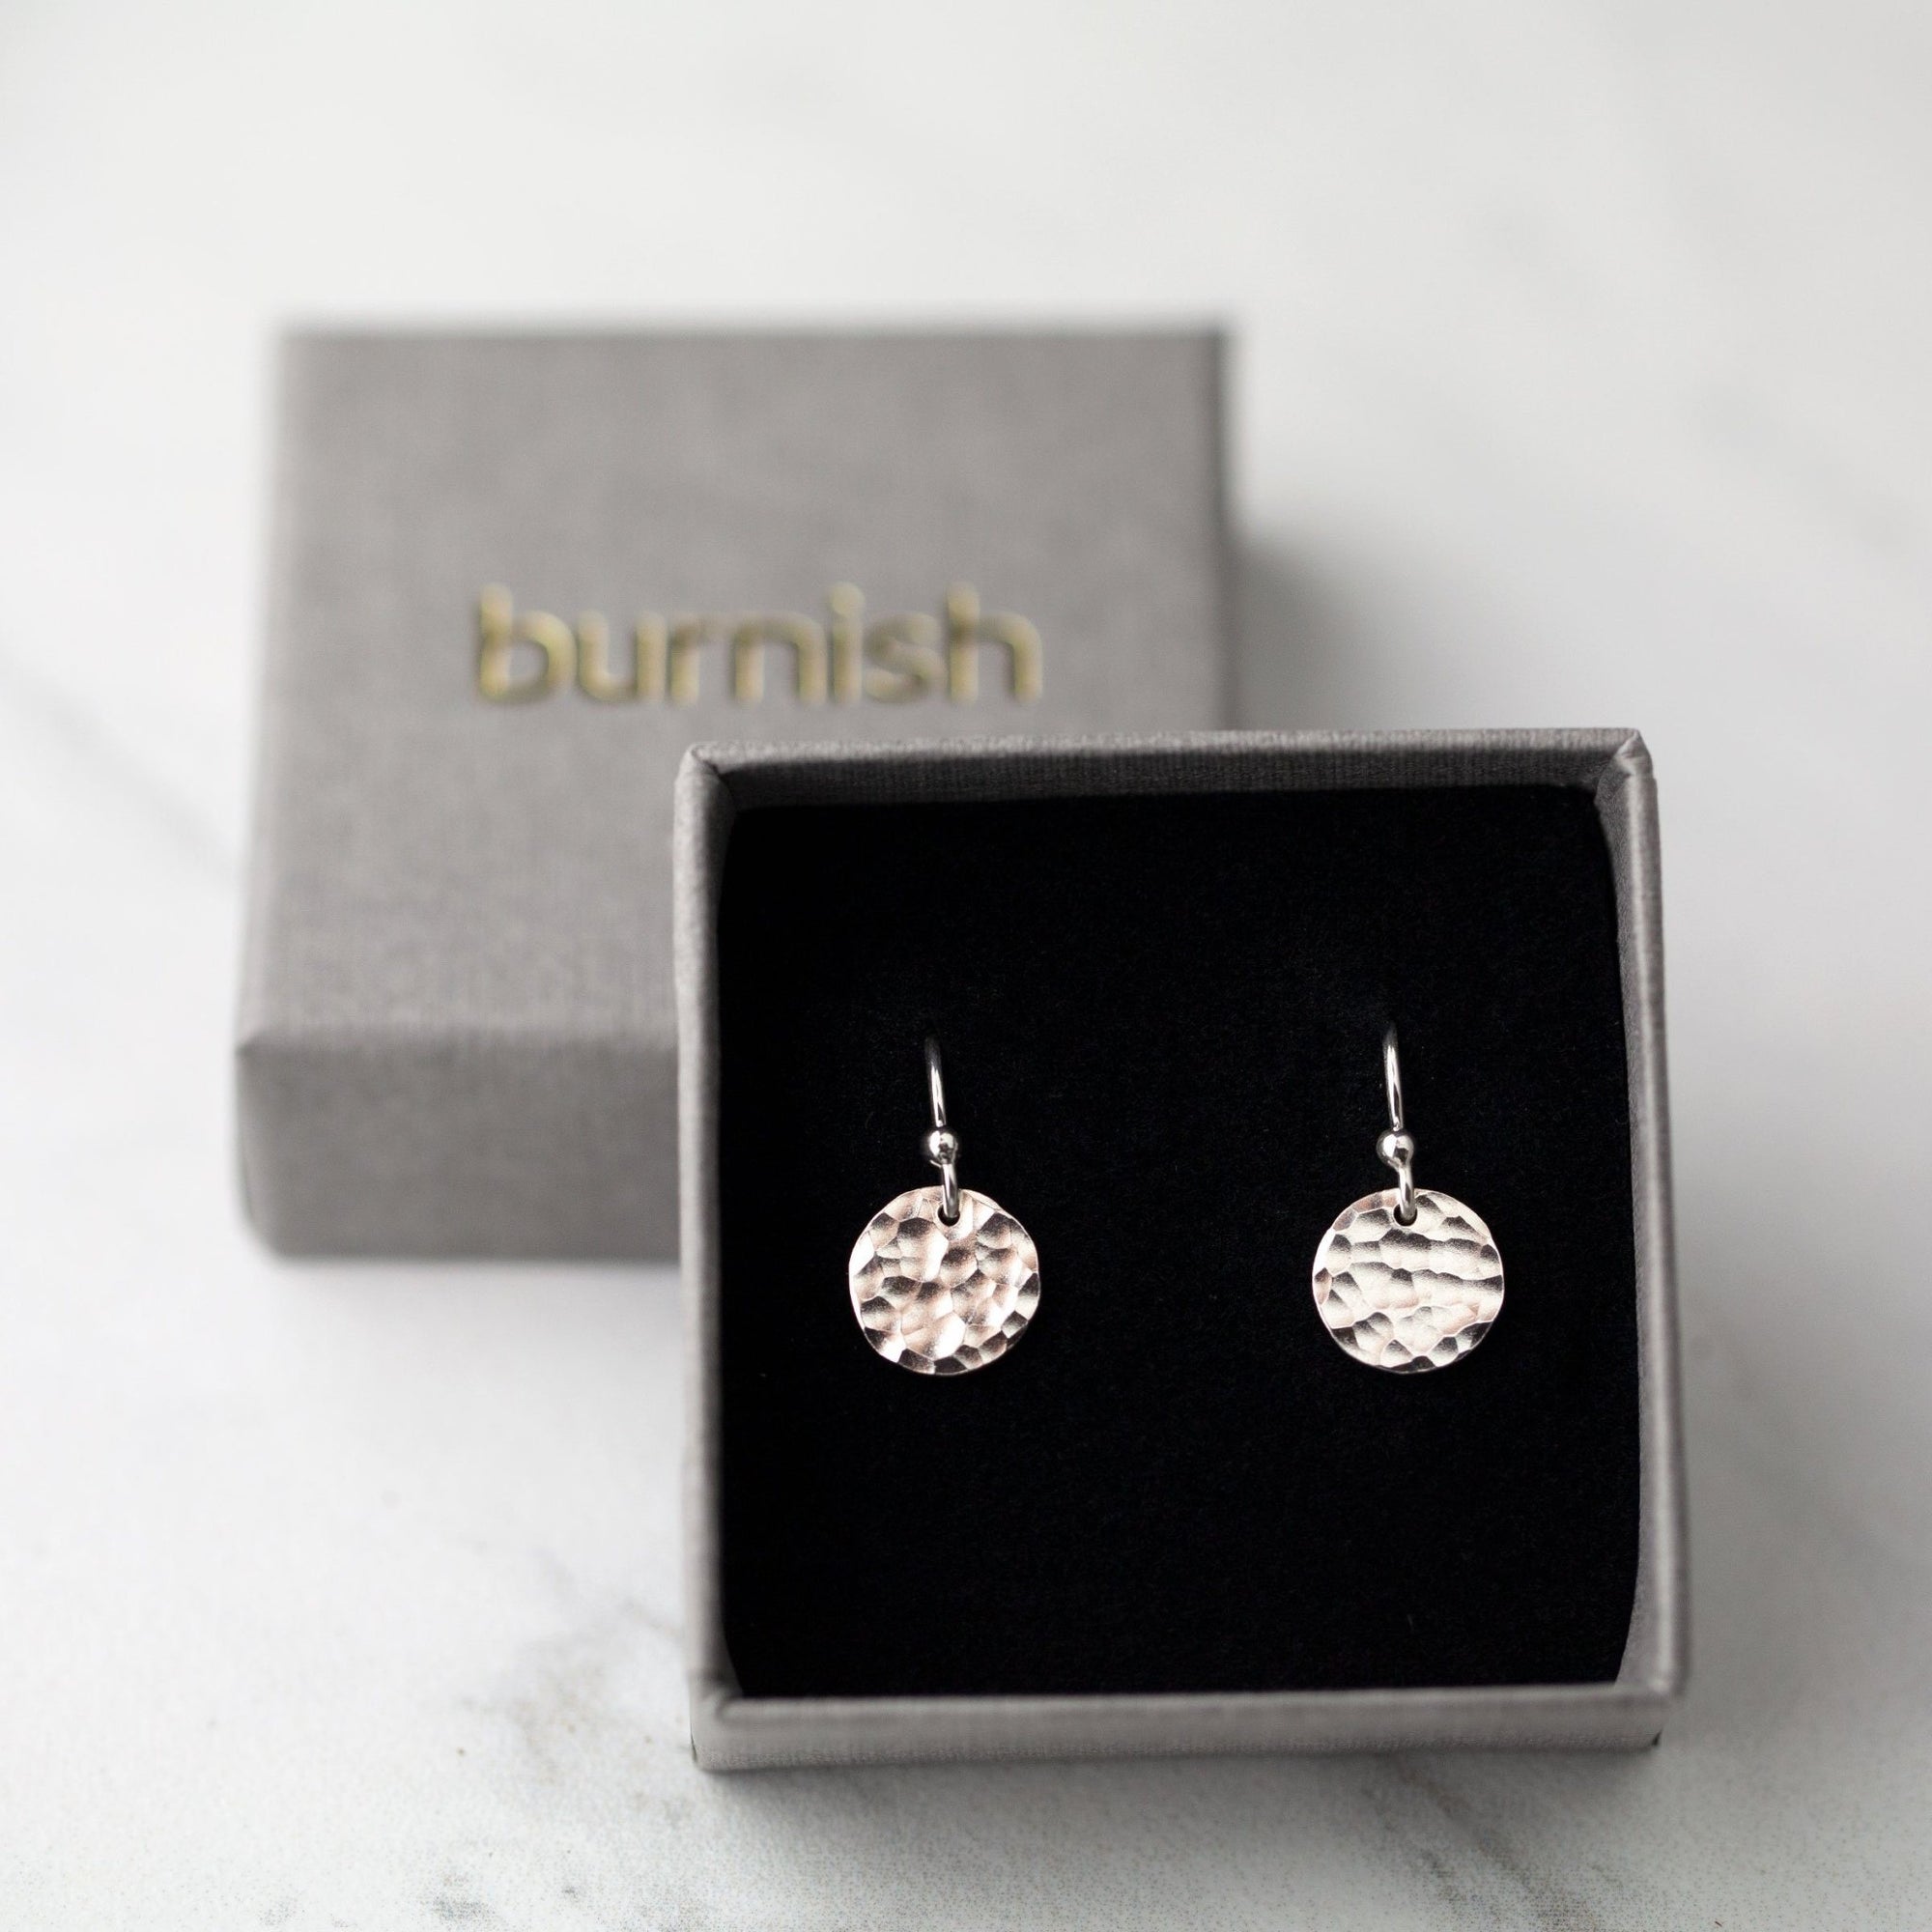 Tiny Silver Hammered Disc Earrings - Handmade Jewelry by Burnish